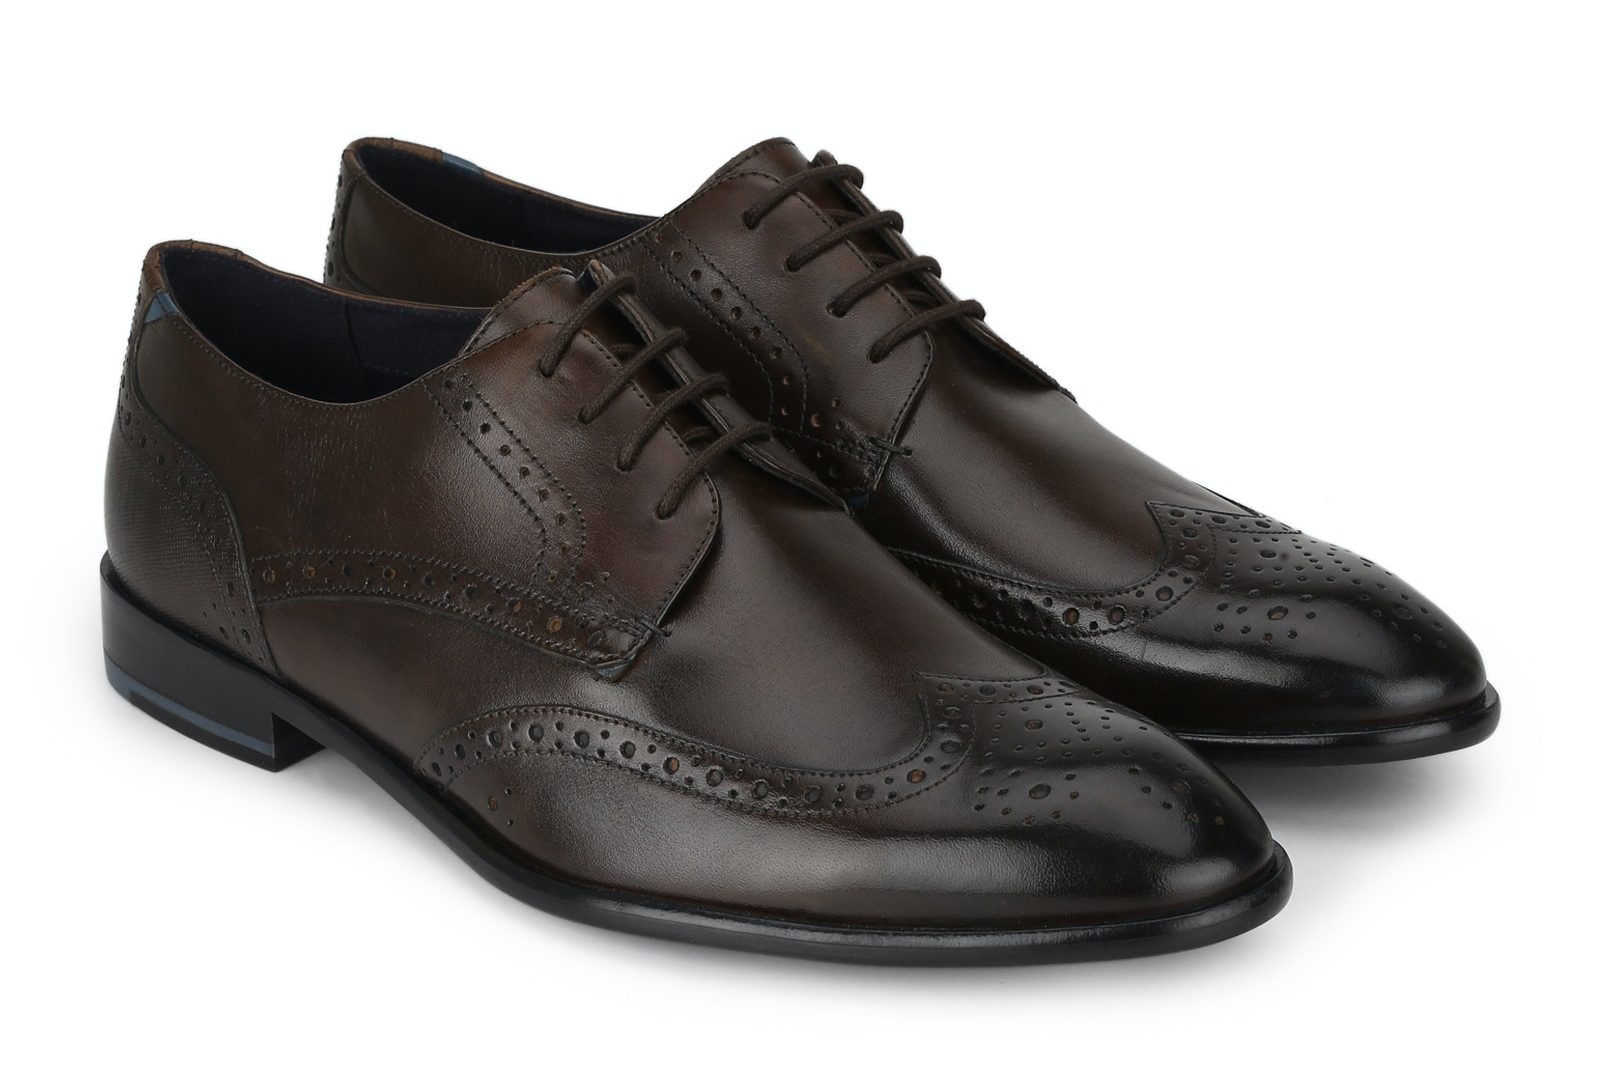 Ted Baker Shoe Brands In India